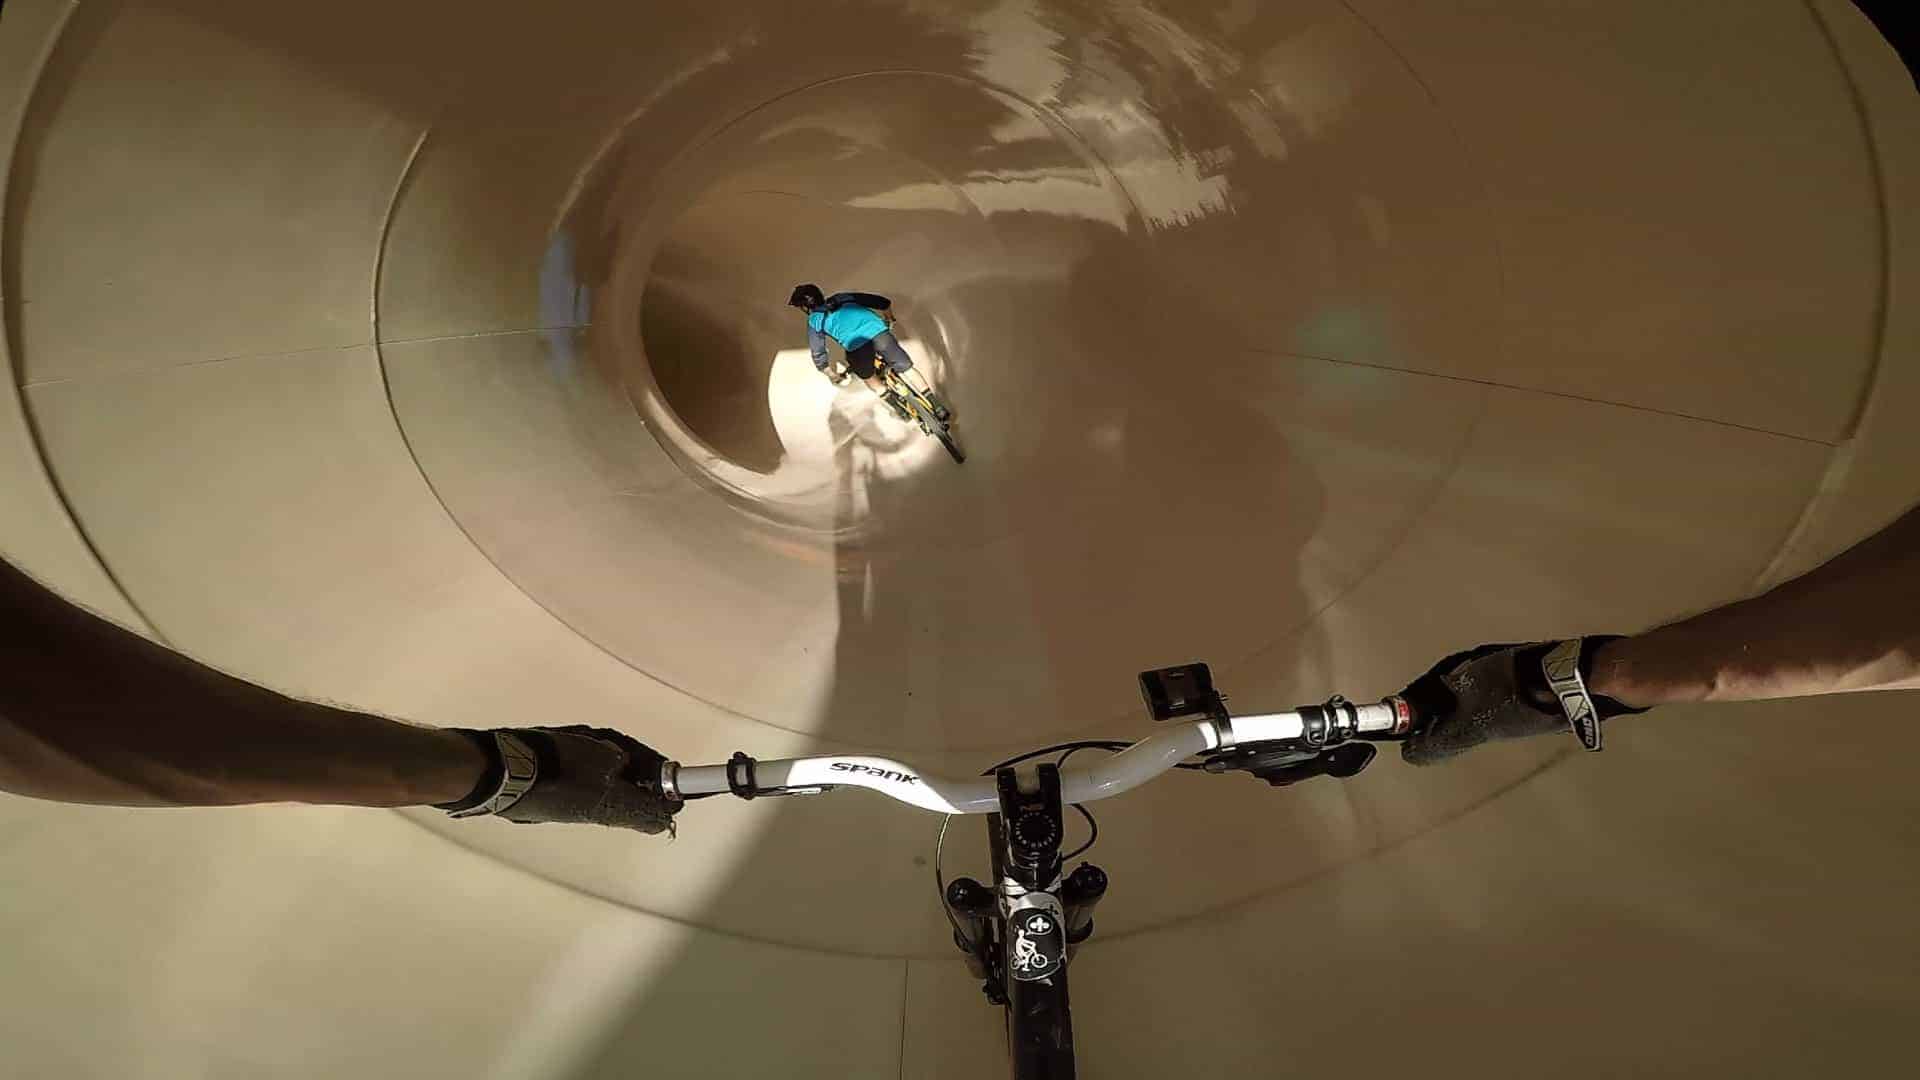 Down the water slide on a mountain bike from a first-person perspective